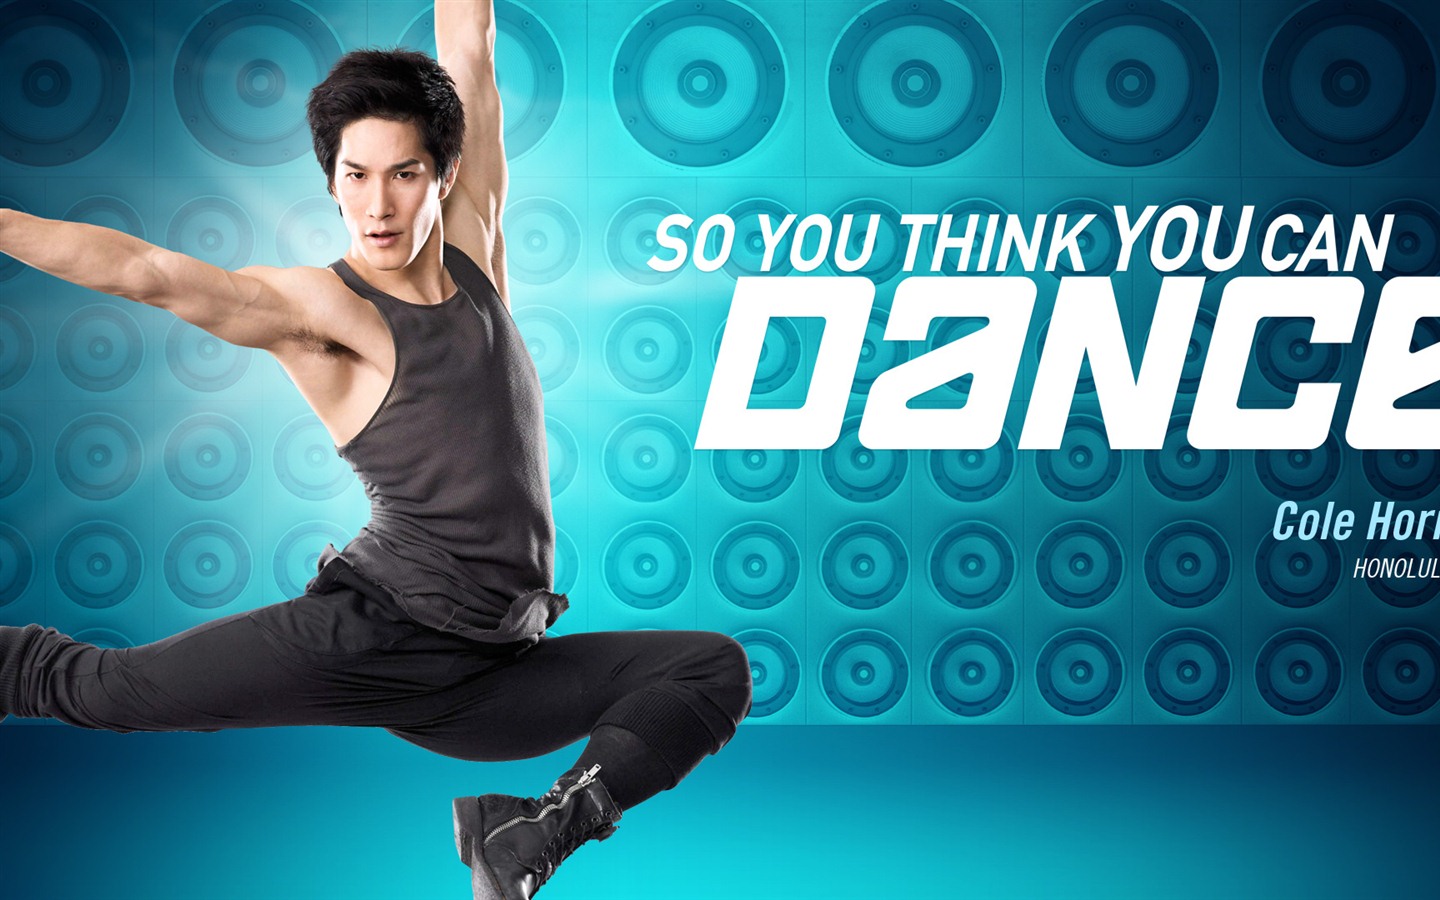 So You Think You Can Dance 舞林争霸 2012高清壁纸8 - 1440x900